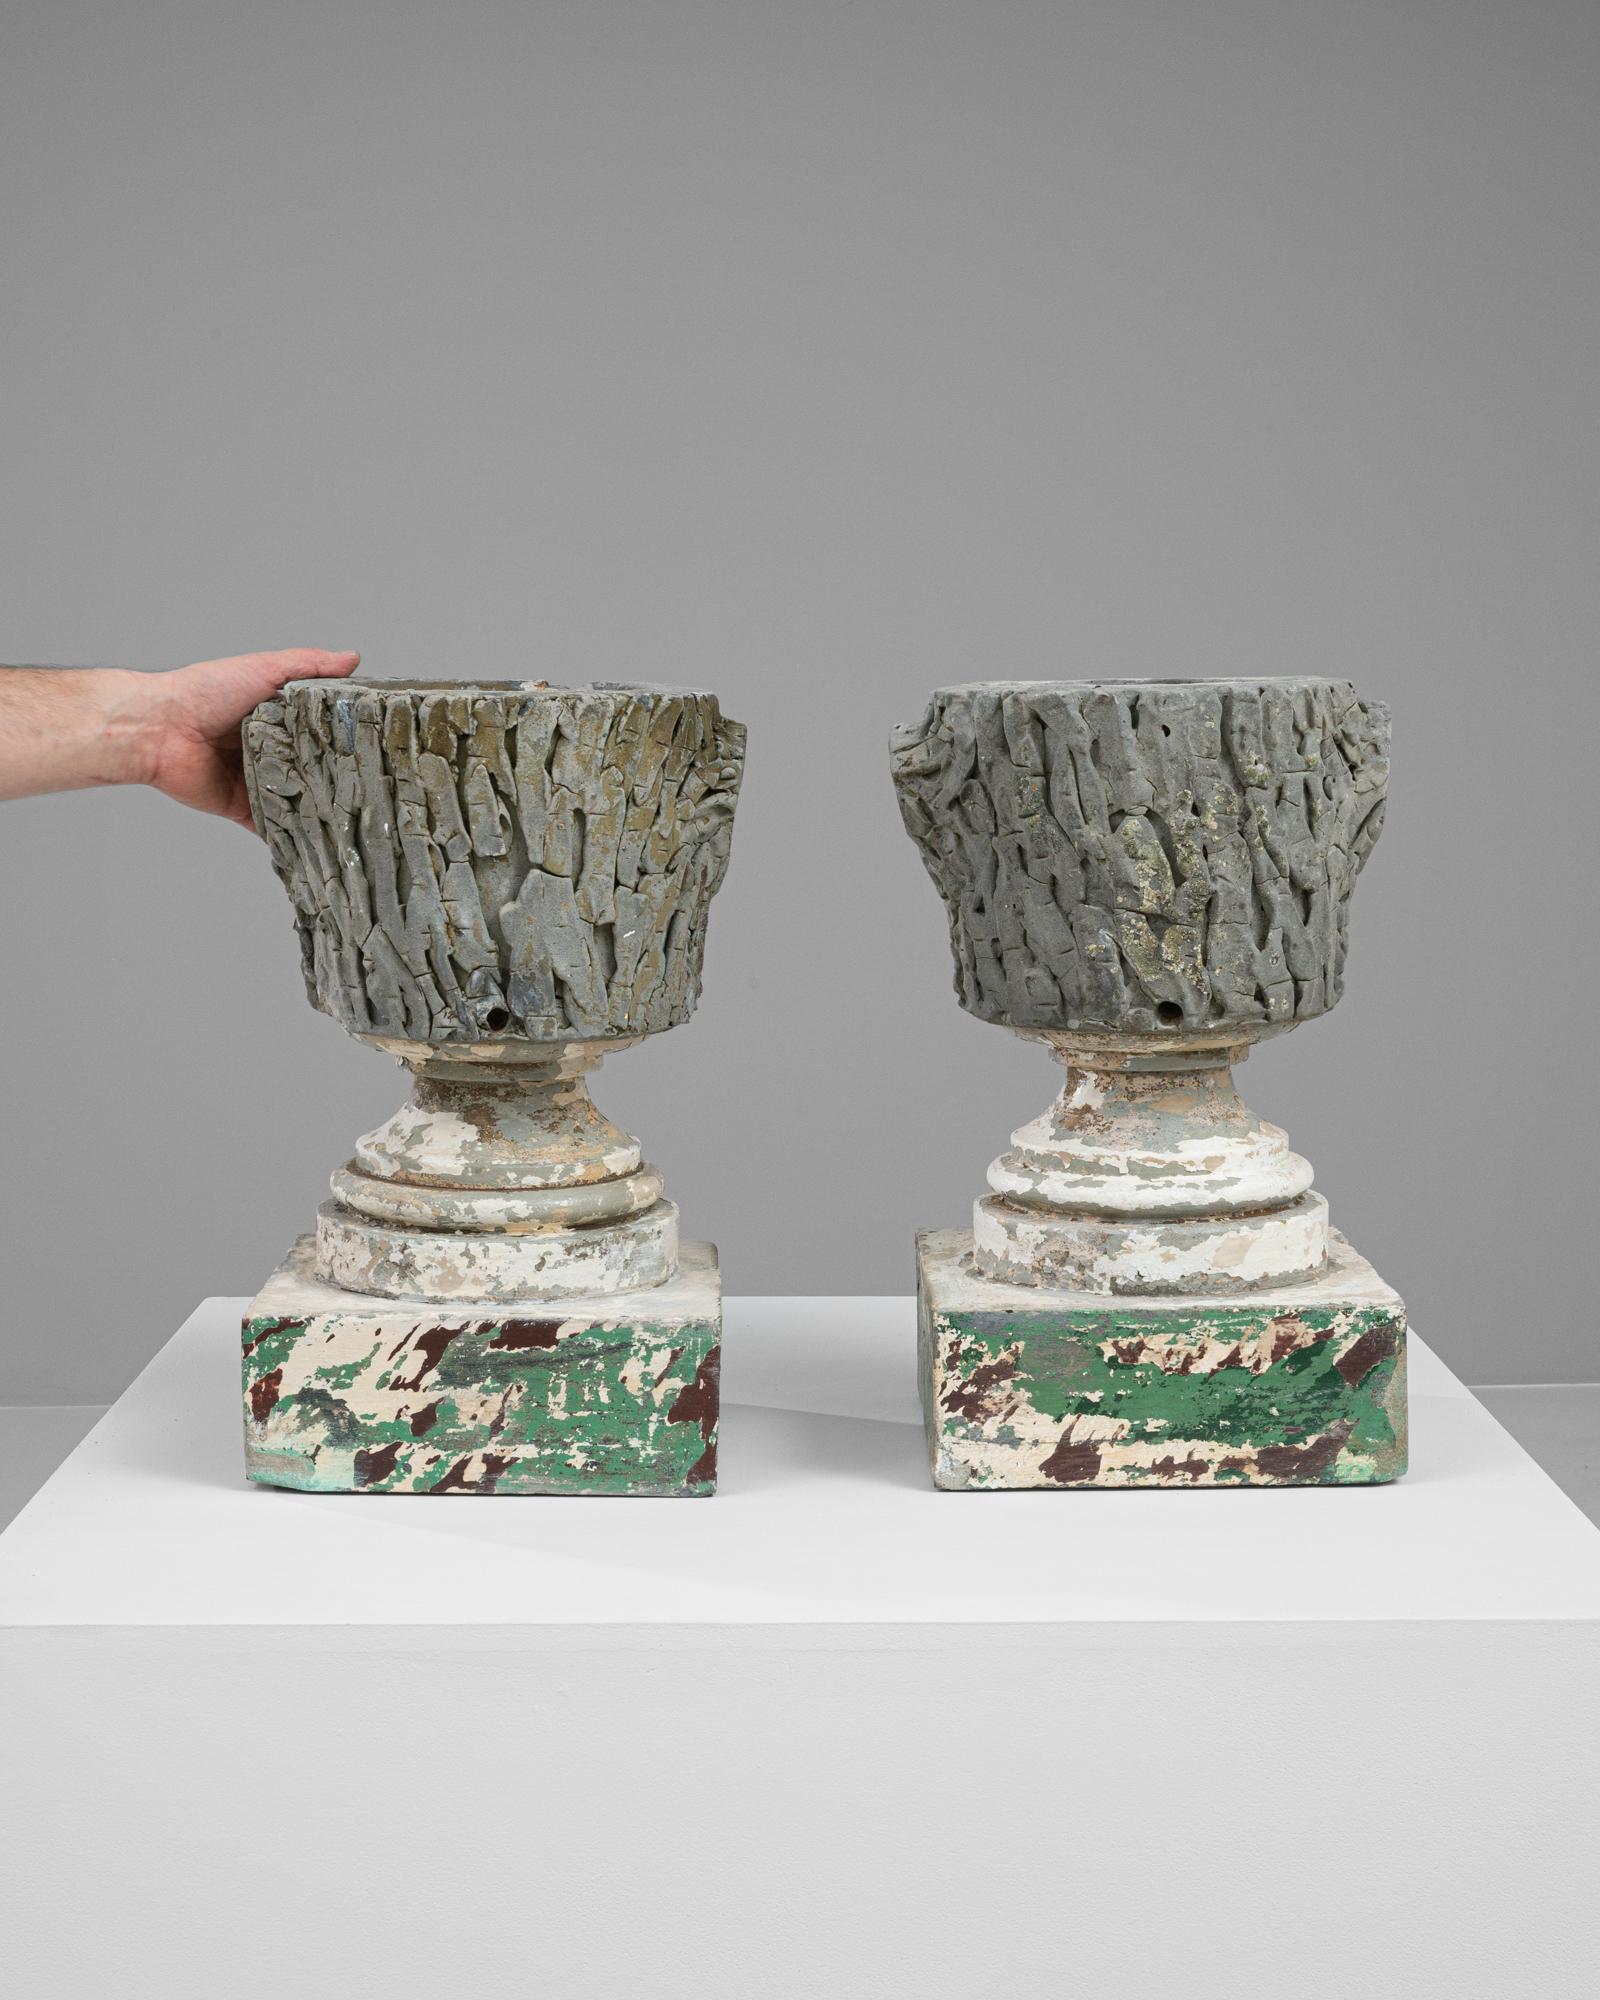 This captivating pair of 20th-century French concrete planters offers a unique aesthetic charm with their heavily textured surfaces and distressed, peeling paint. Each planter stands on a distinctively ornate pedestal base, which contrasts